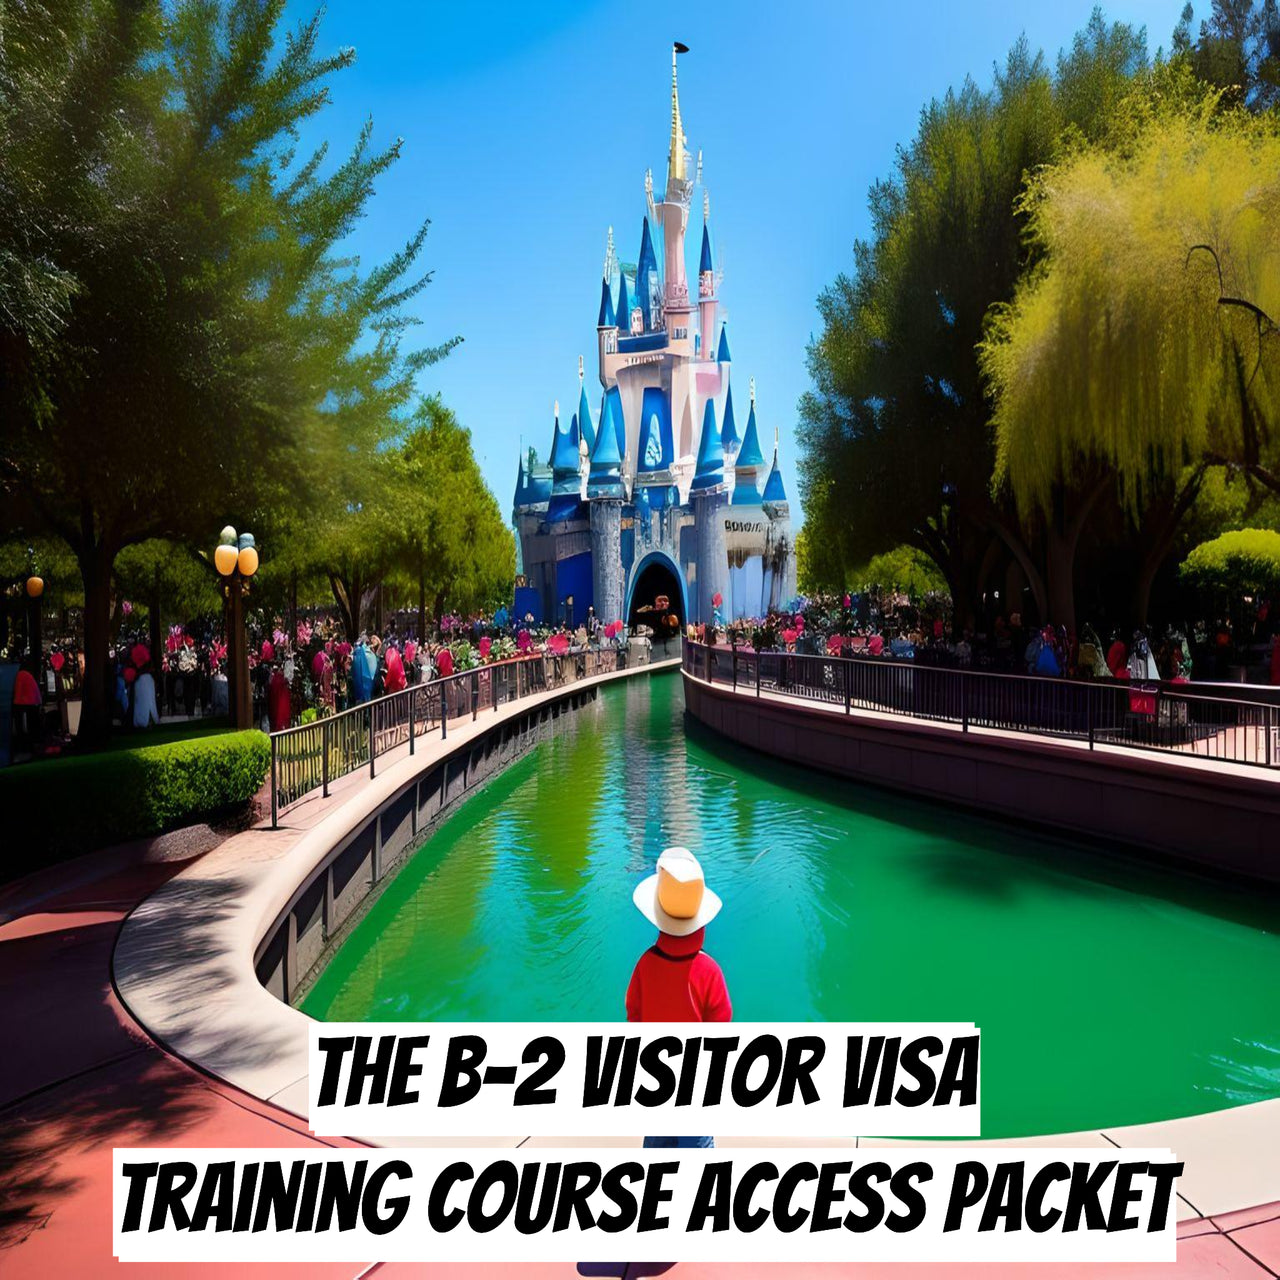 B-2 Visitor Visa Training Course Access Packet